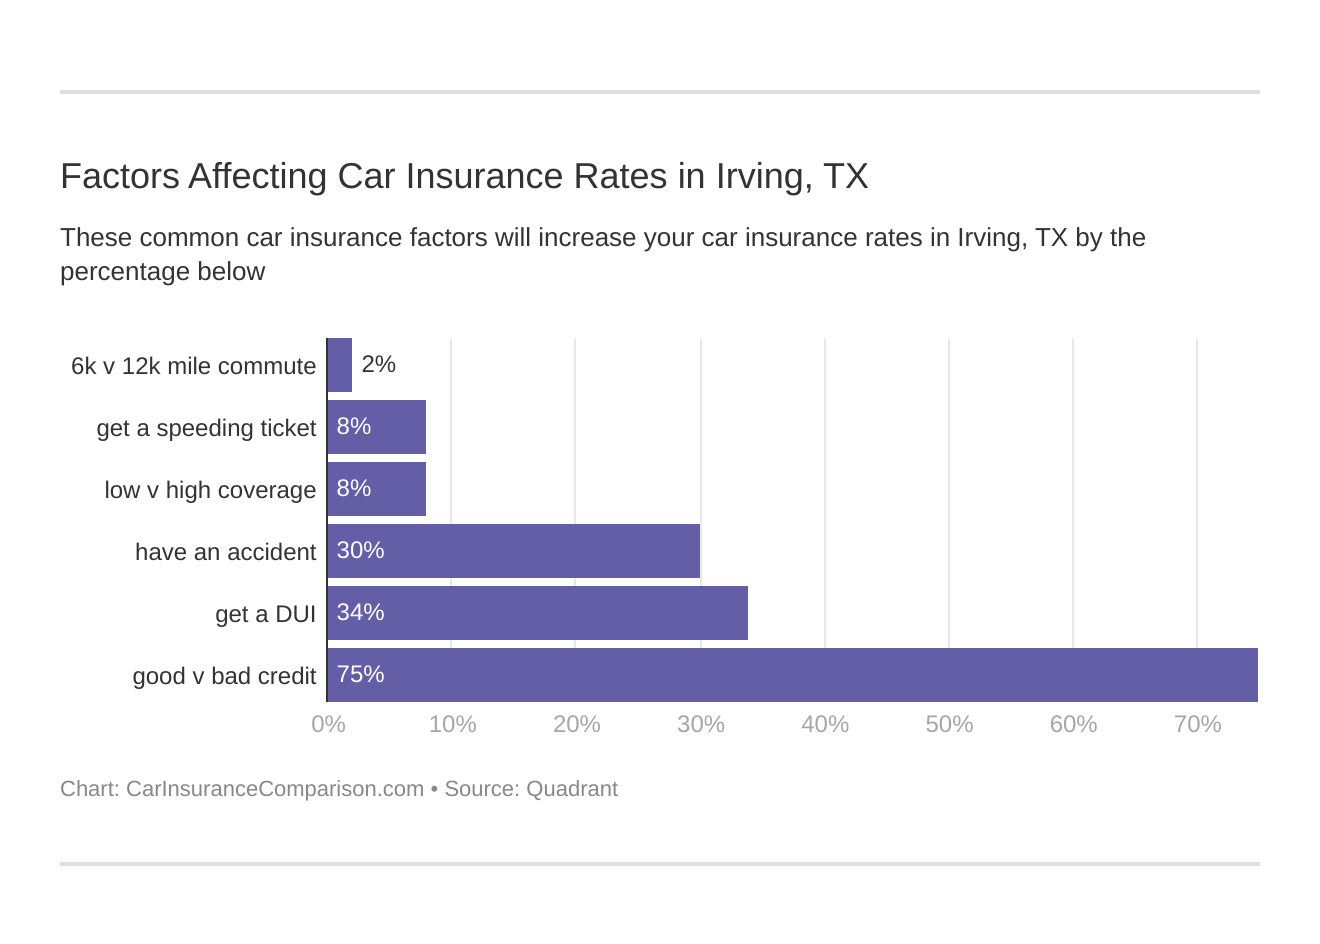 Factors Affecting Car Insurance Rates in Irving, TX